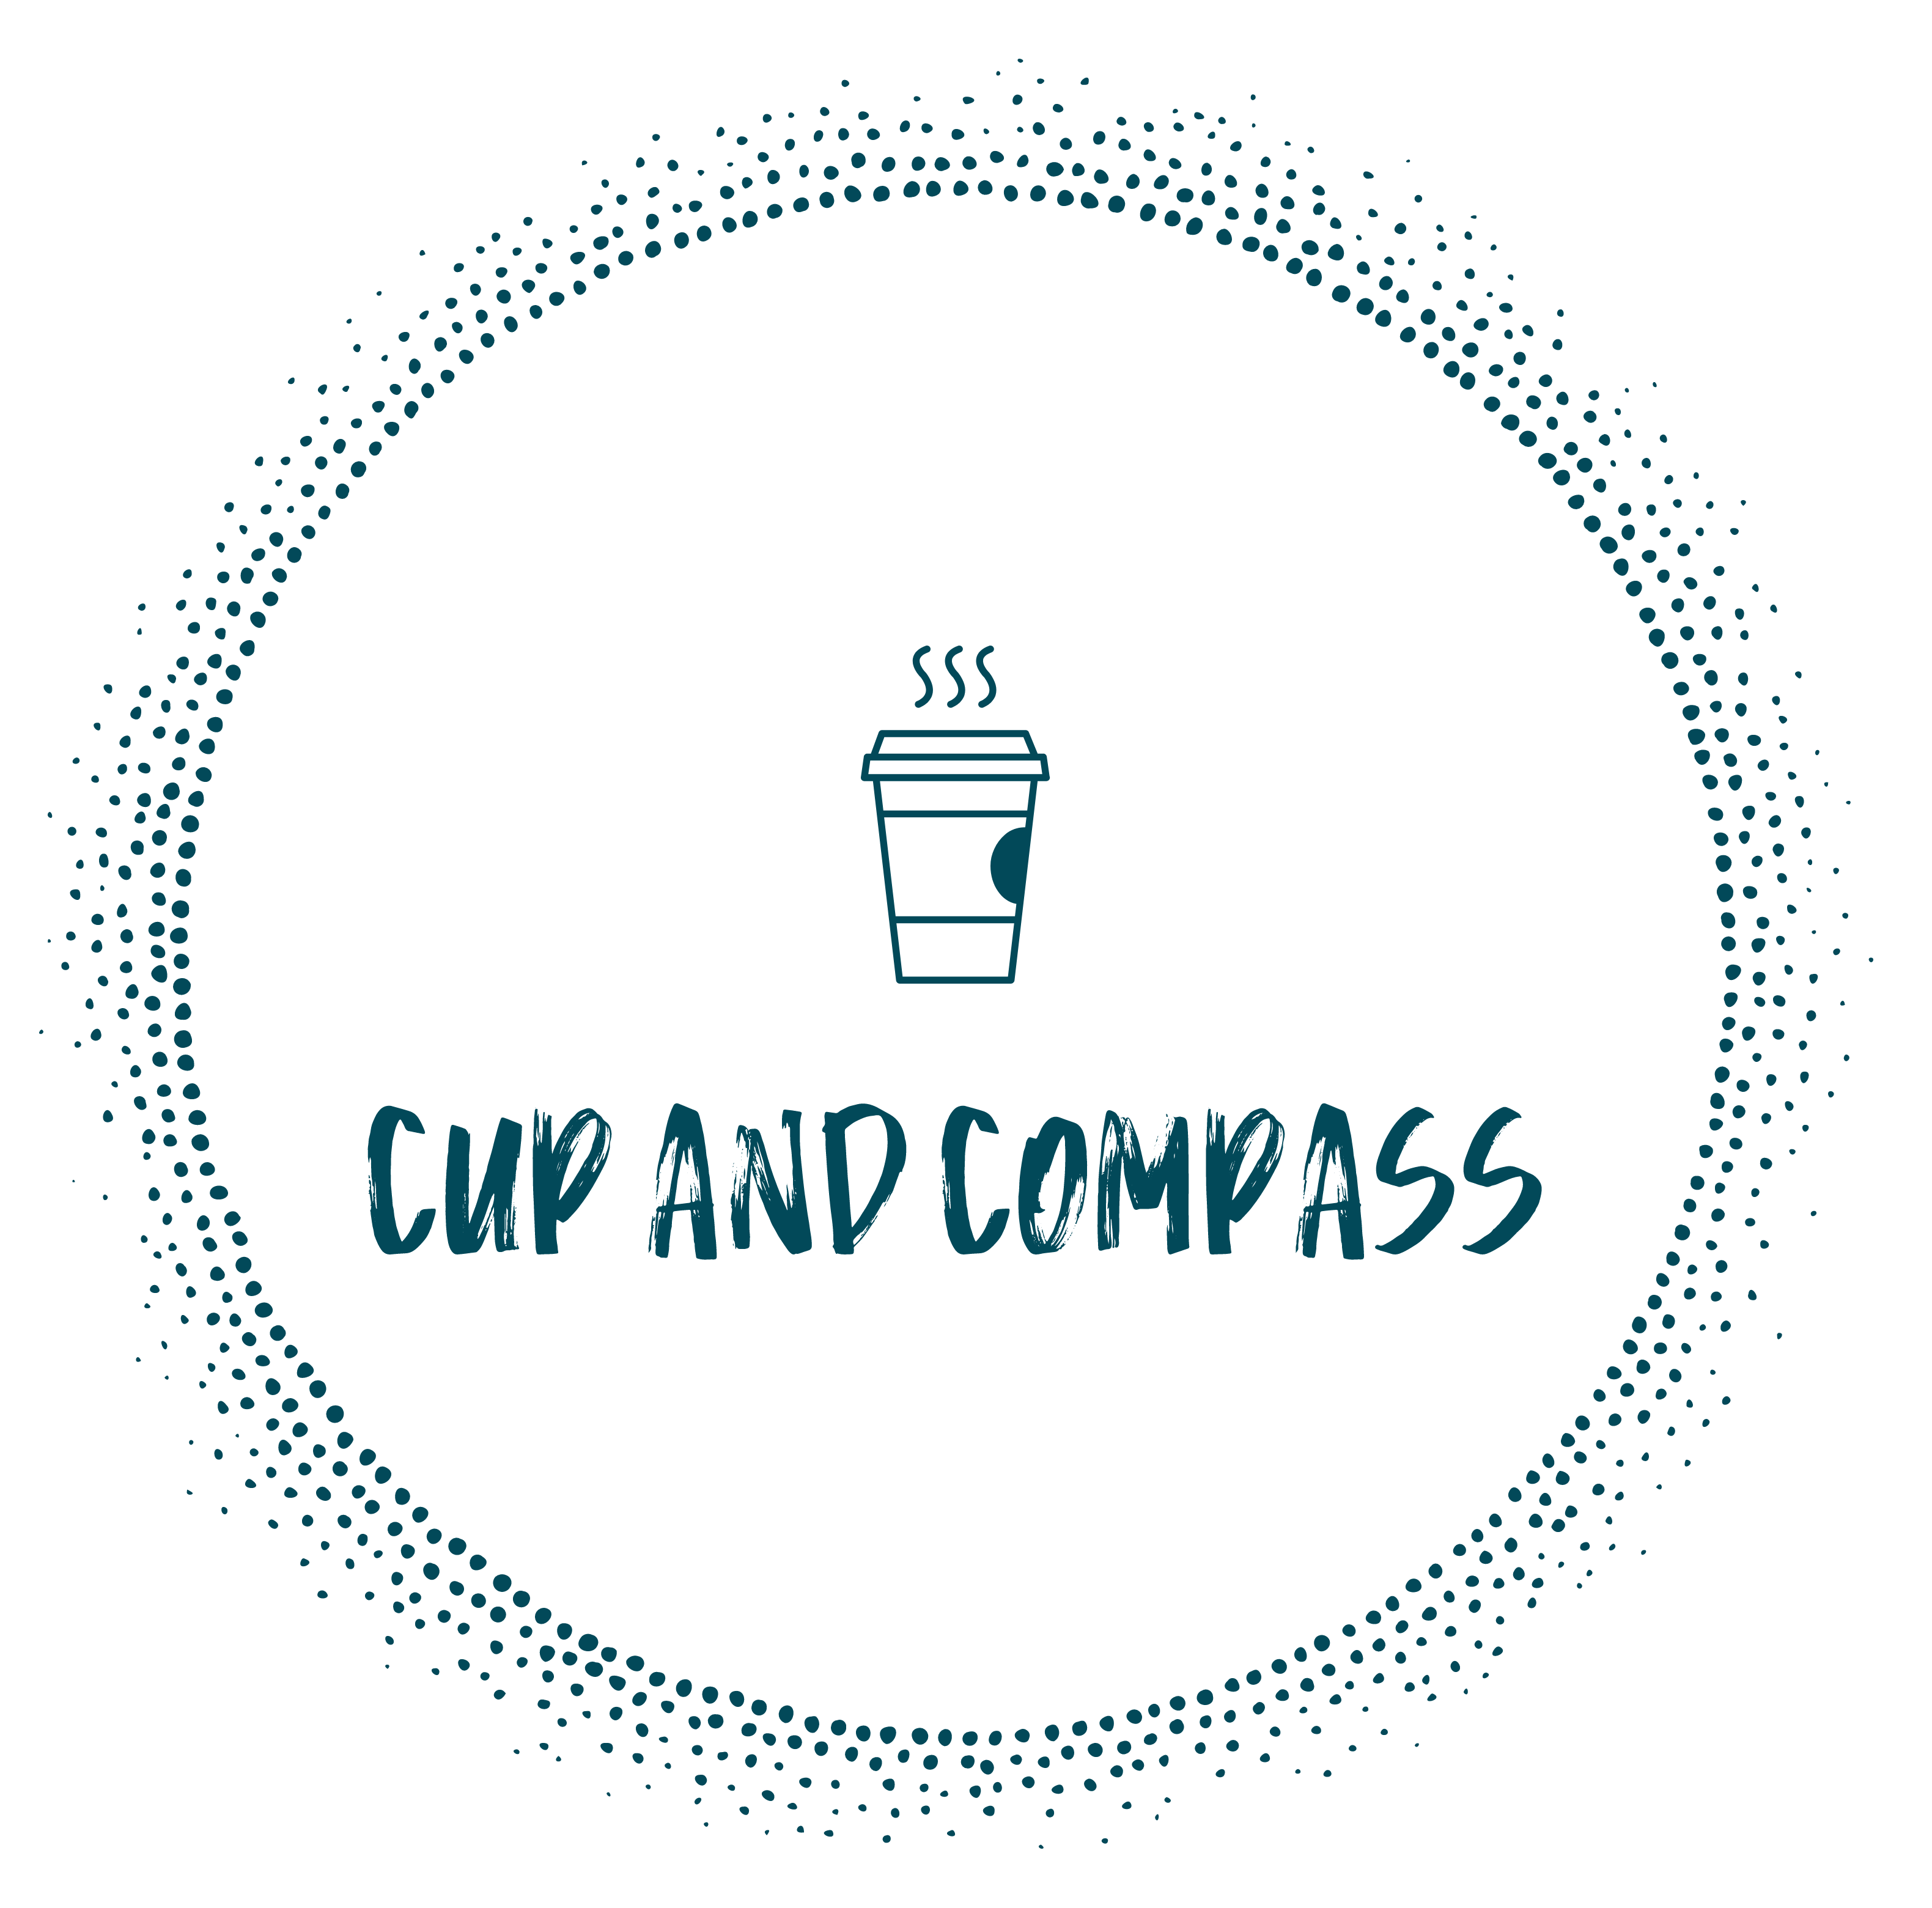 Cup and Compass